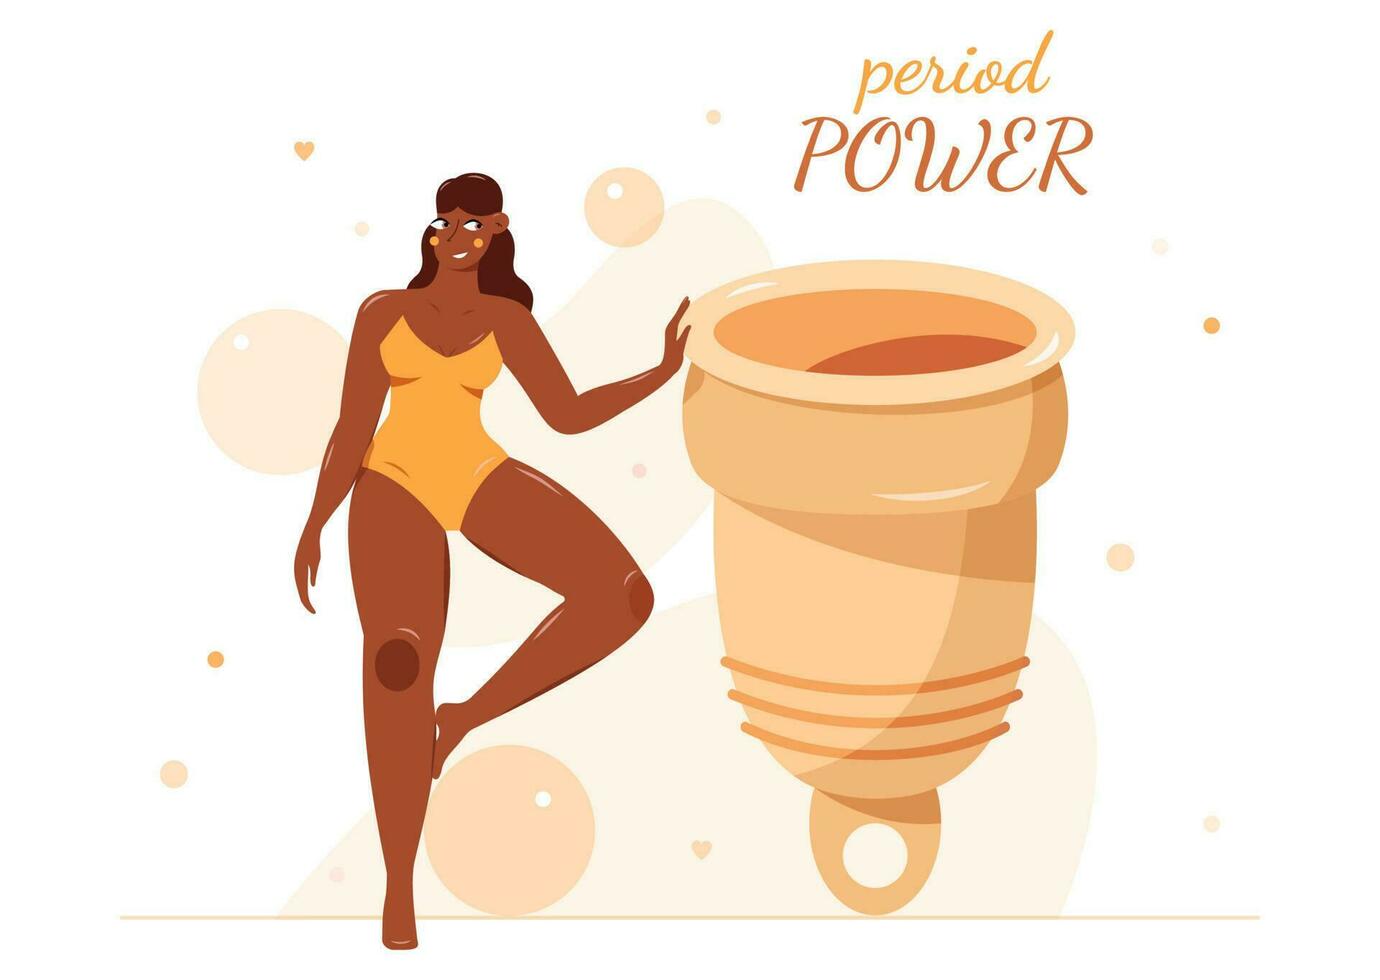 Menstrual cup and African-American woman. Period power concept. vector